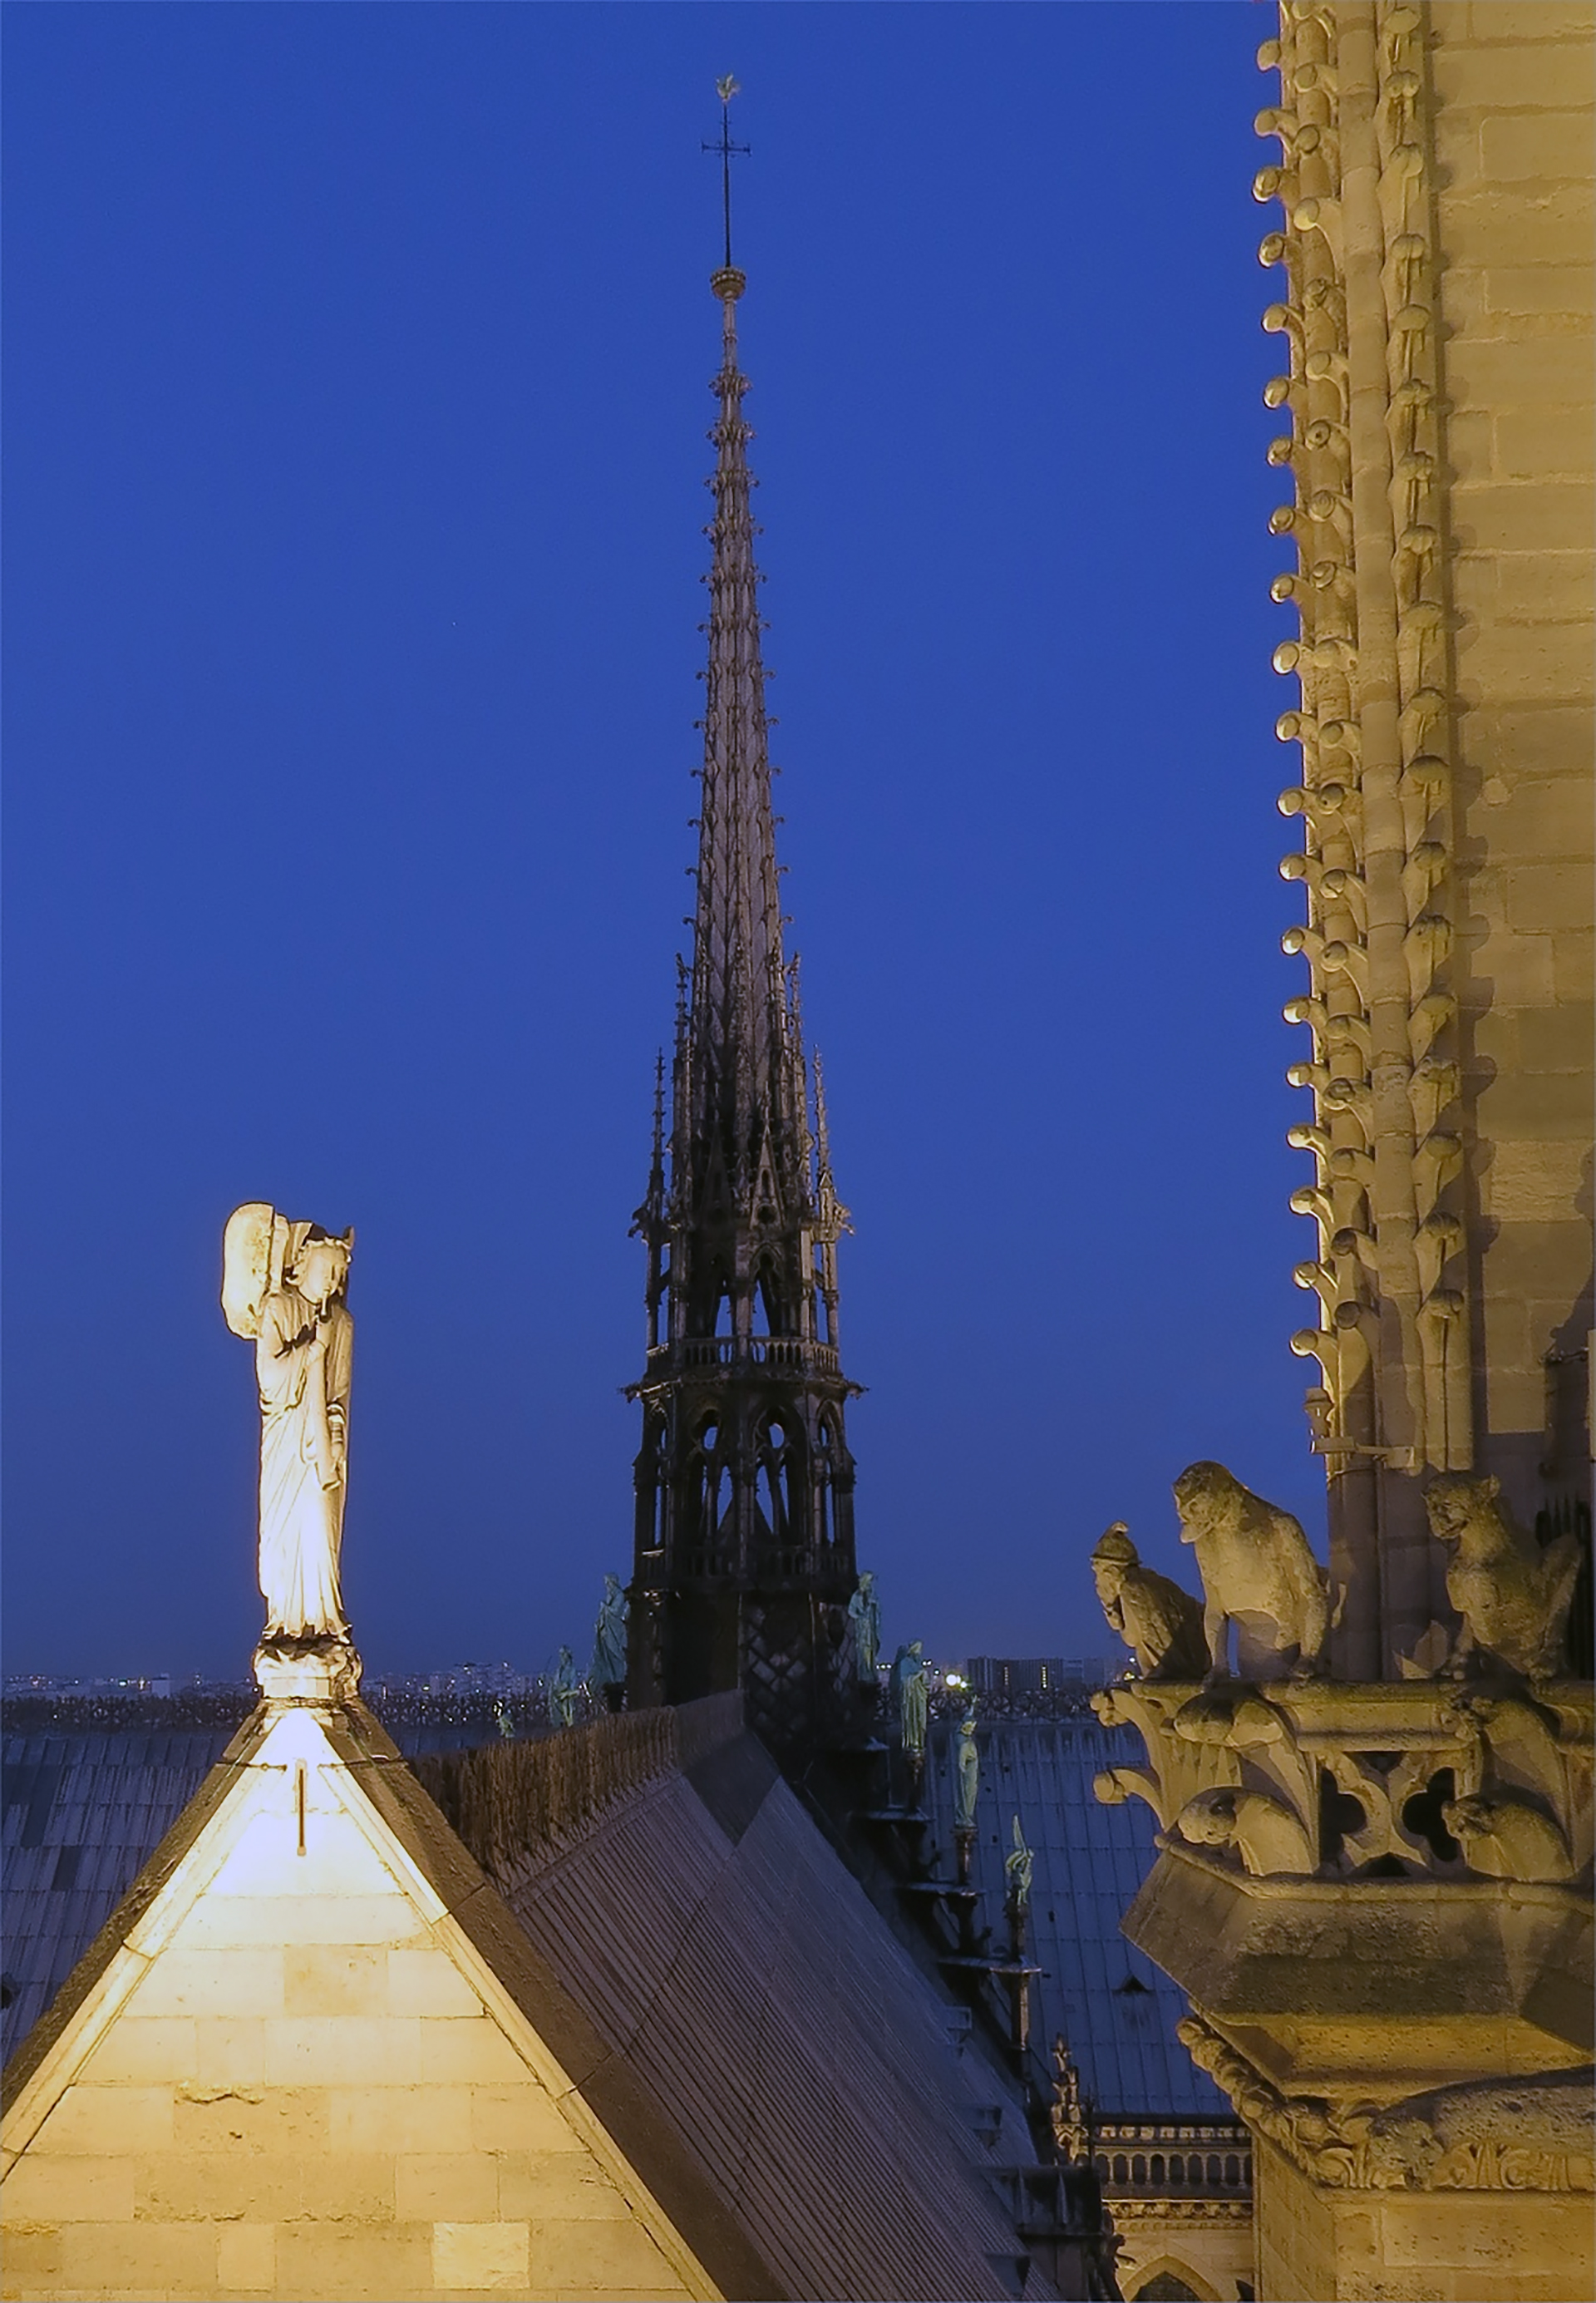 notre dame cathedral and the spire of viollet the duke, completed in 1859. in the foreground, the angel of the apocalypse and the alchemist philosopher.